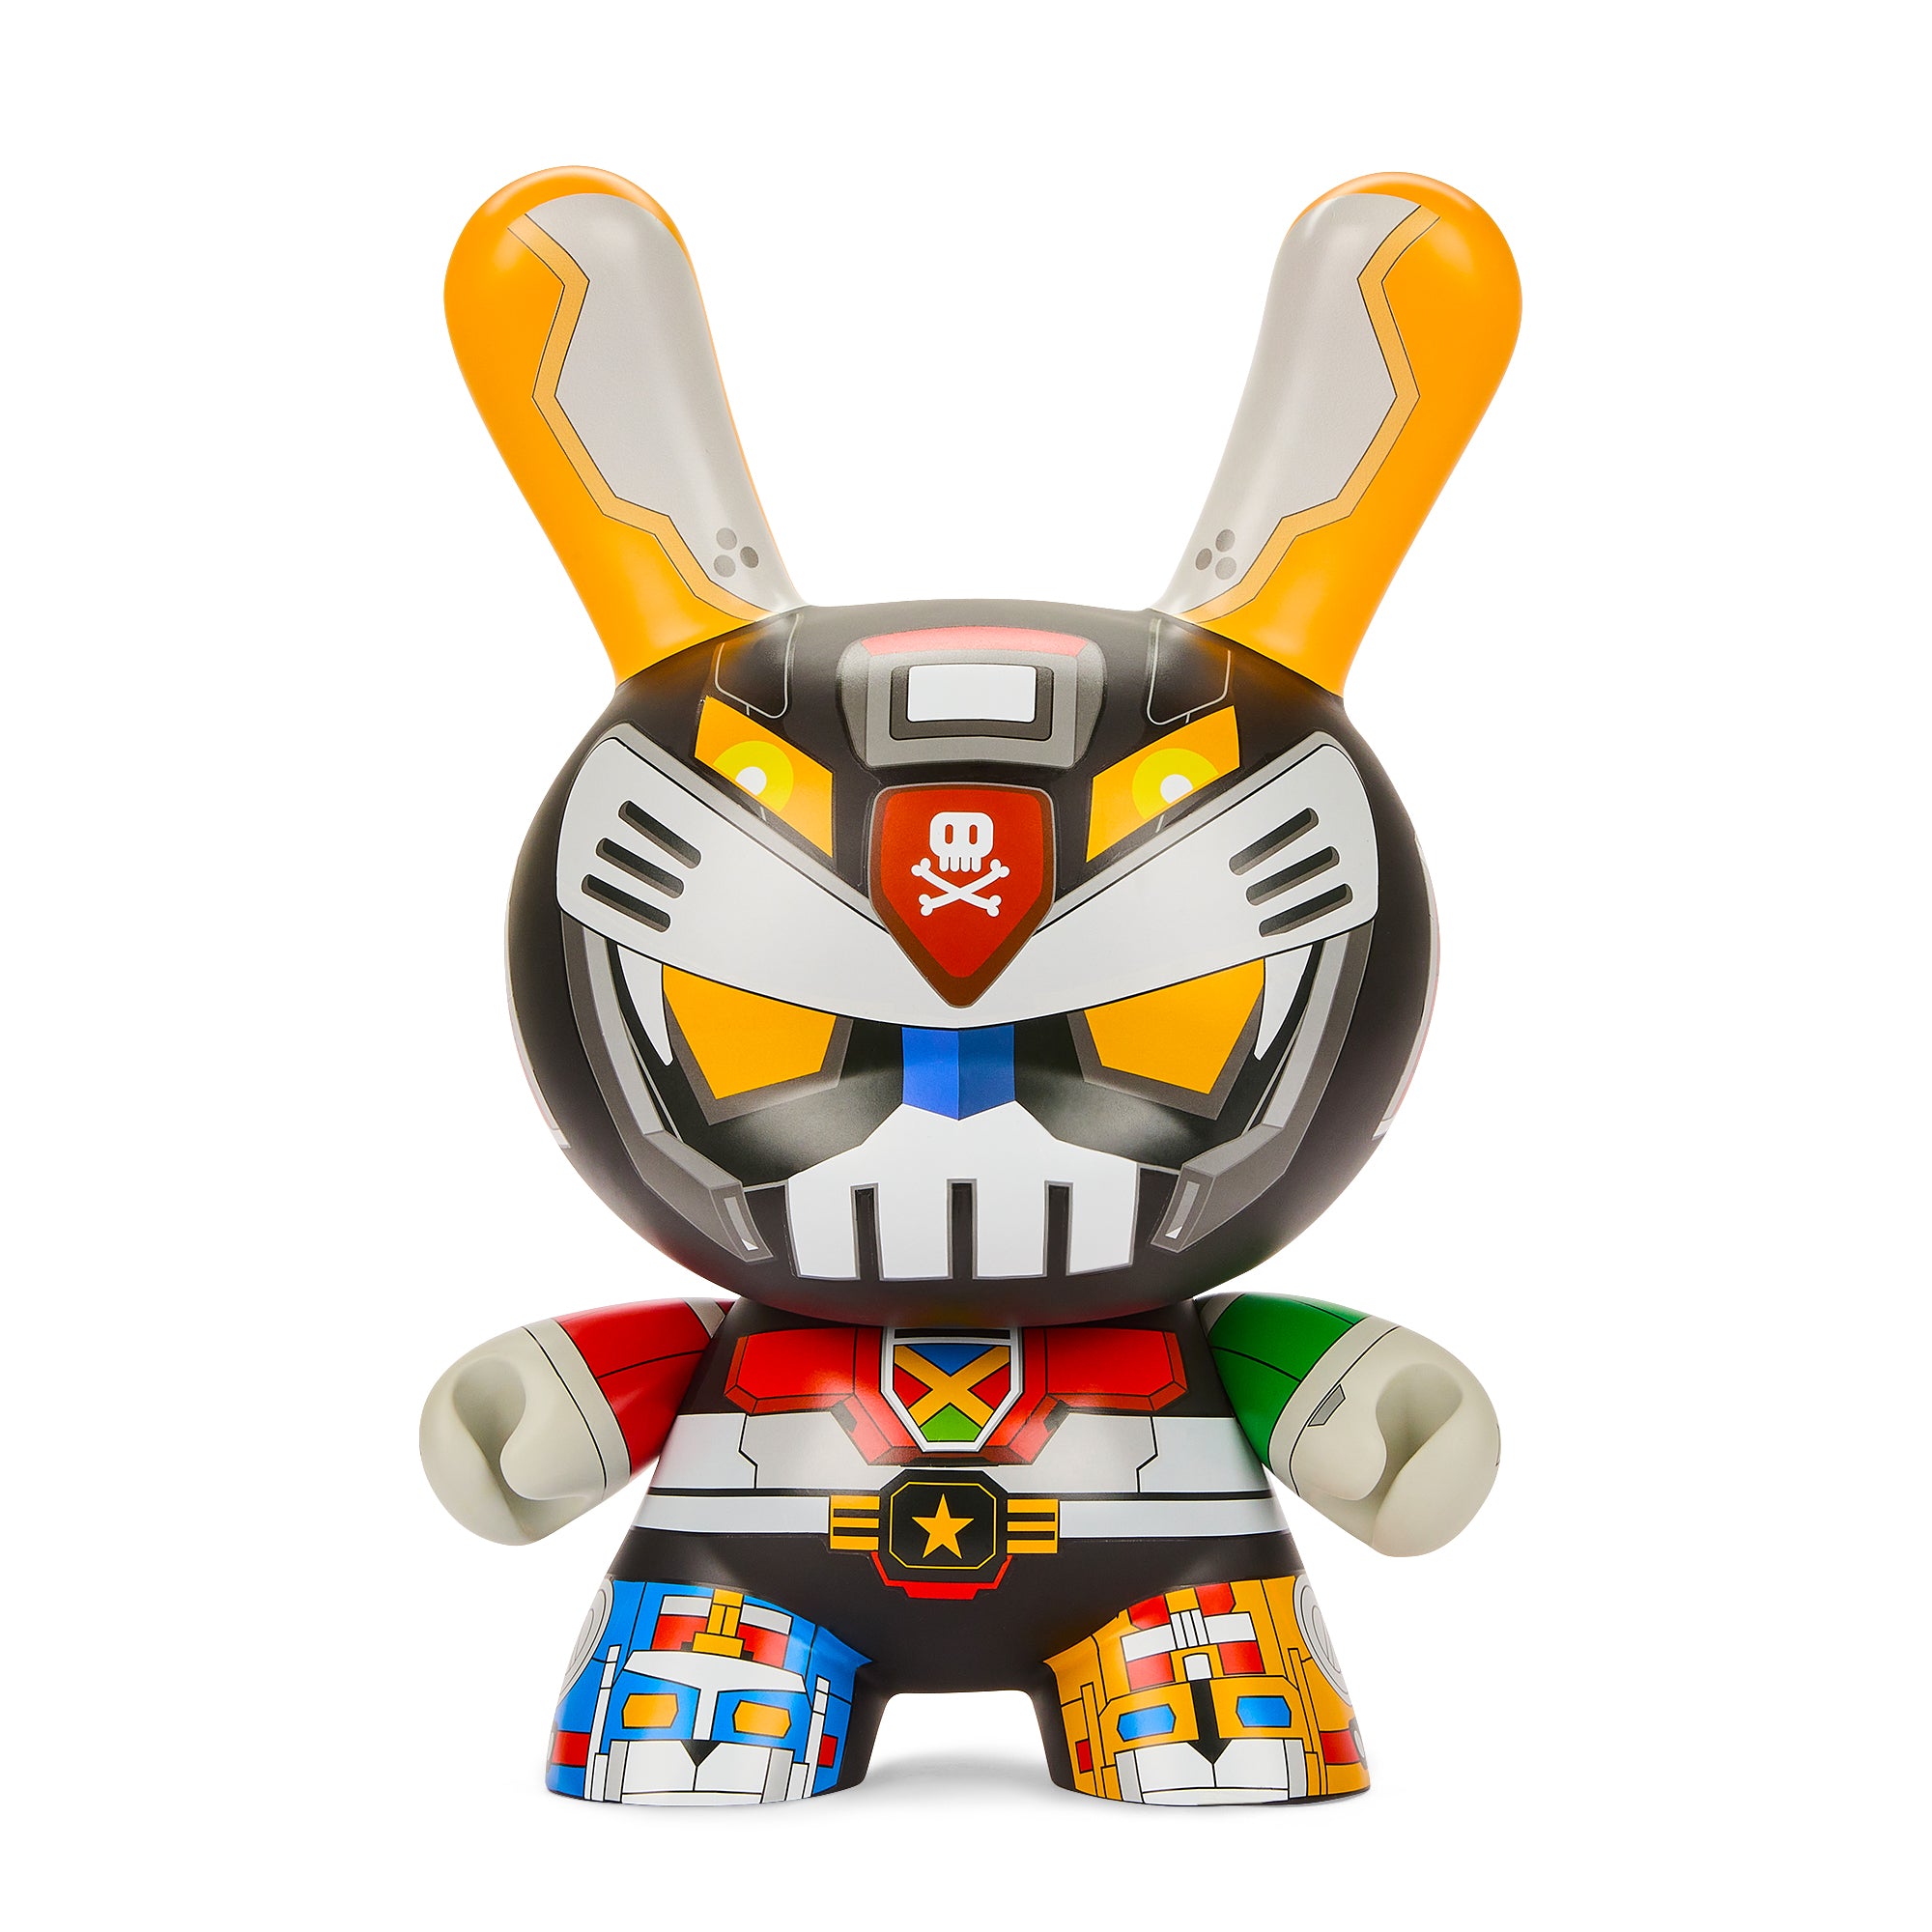 Image of VOLTEQ 20” Dunny Vinyl Art Figure by Quiccs - Limited Edition of 500  (PRE-ORDER) 